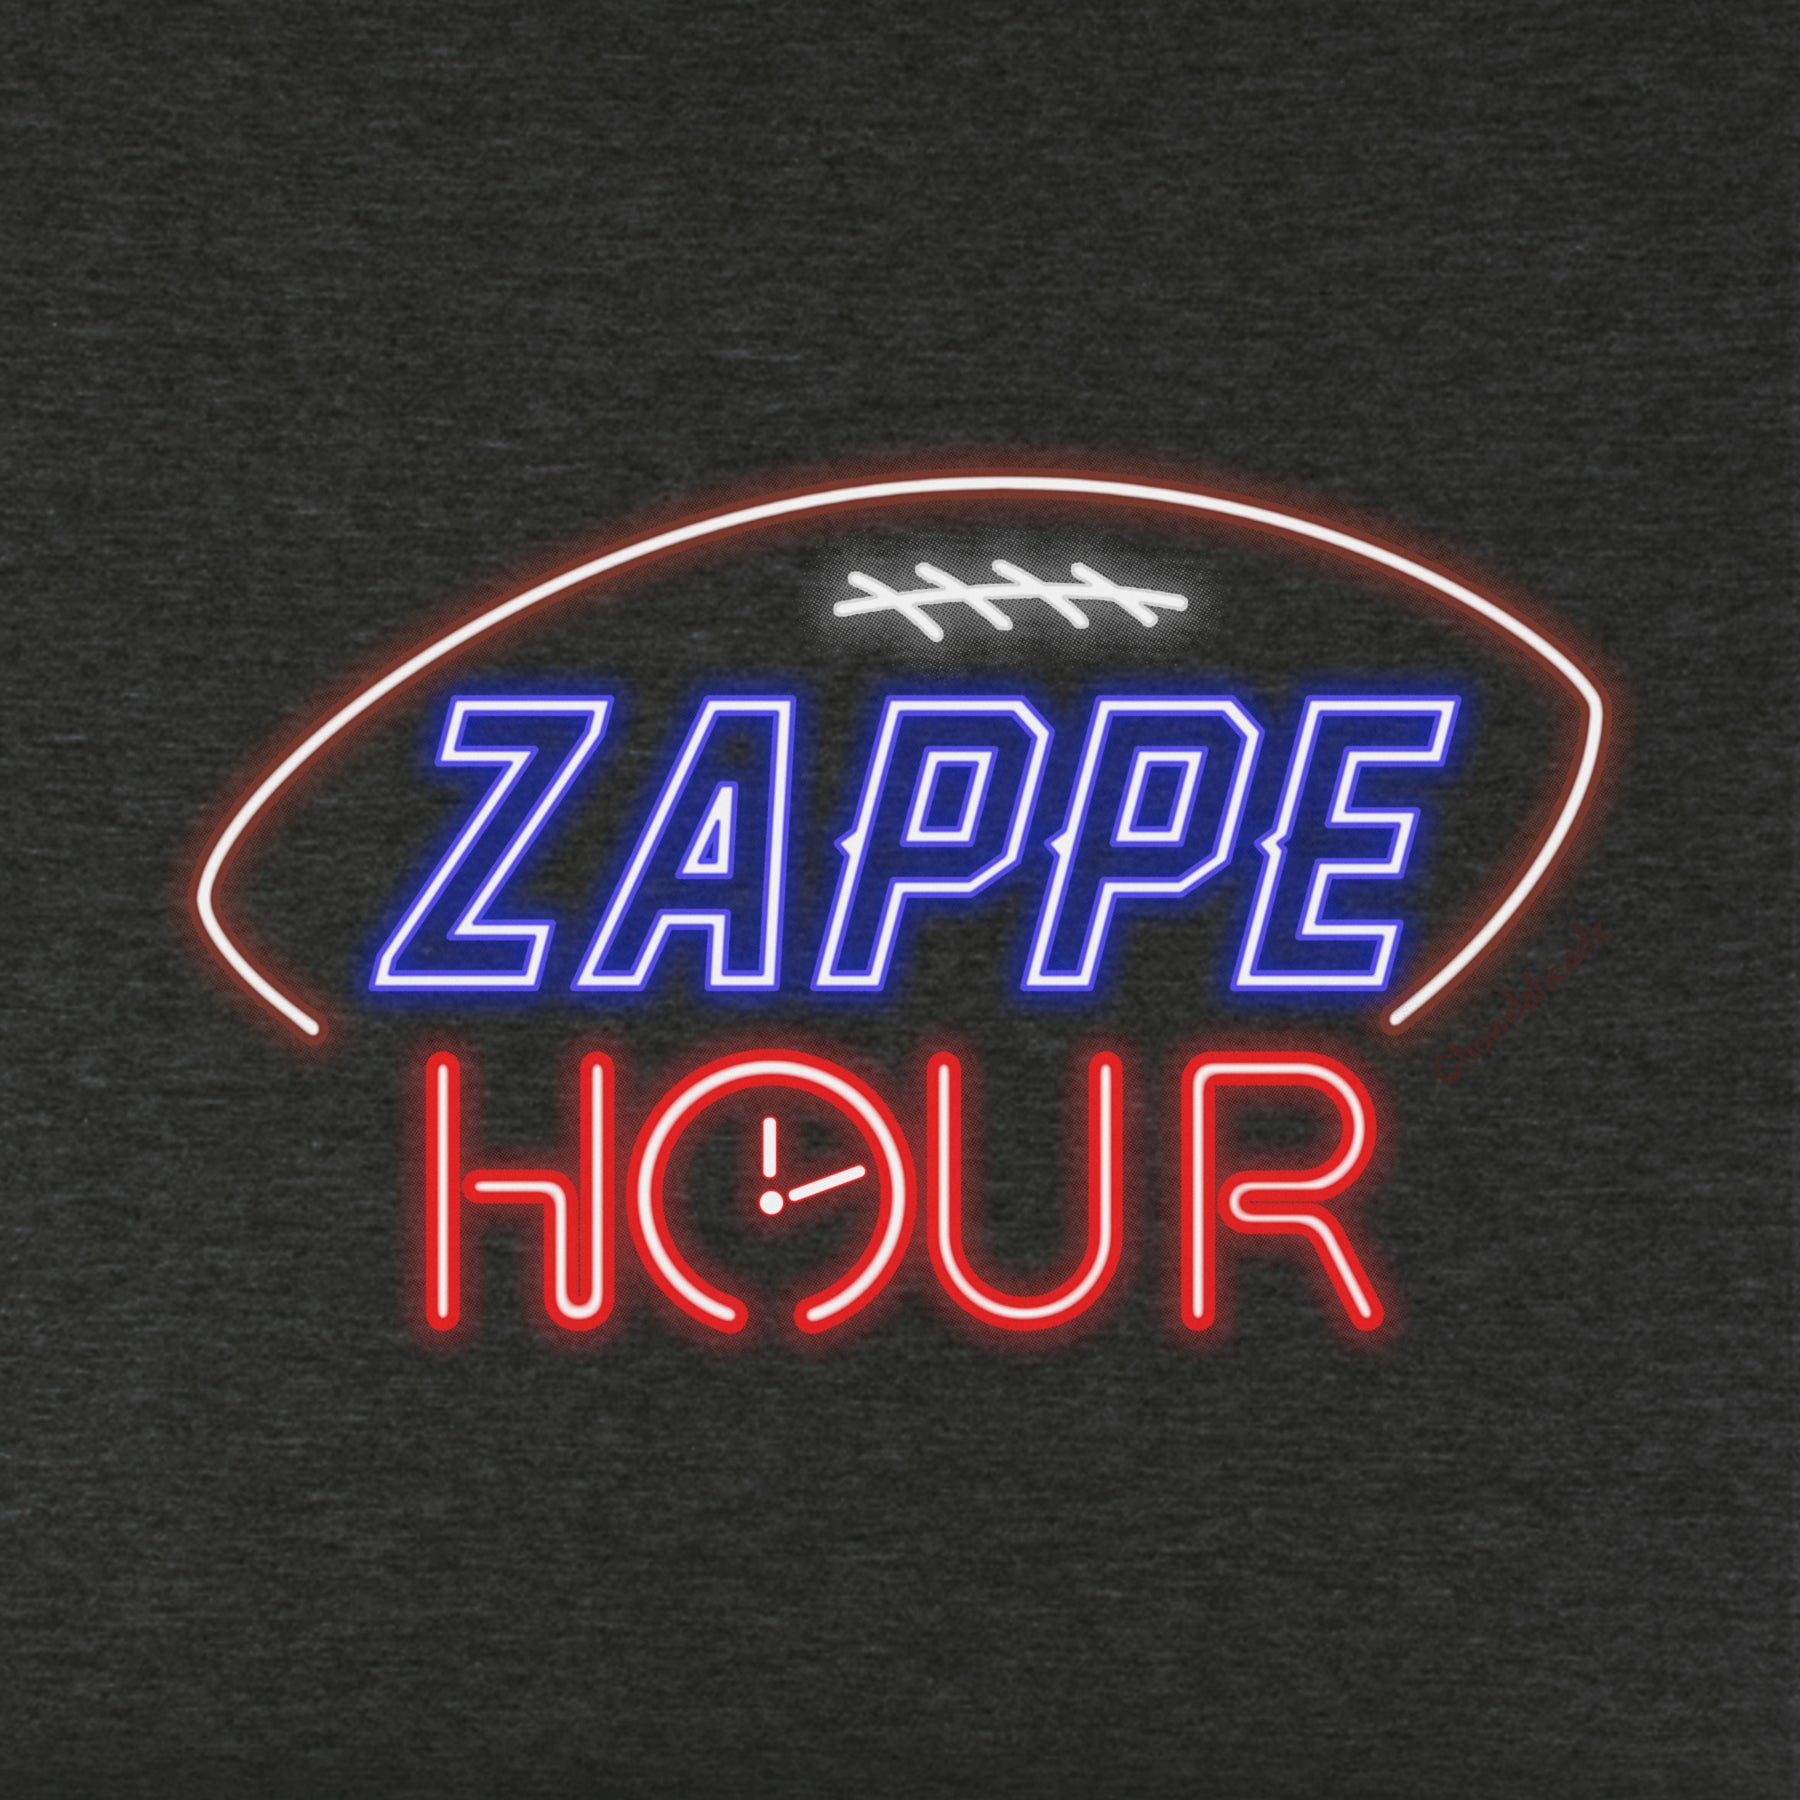 Zappe Hour Neon Sign Youth T-Shirt - Chowdaheadz